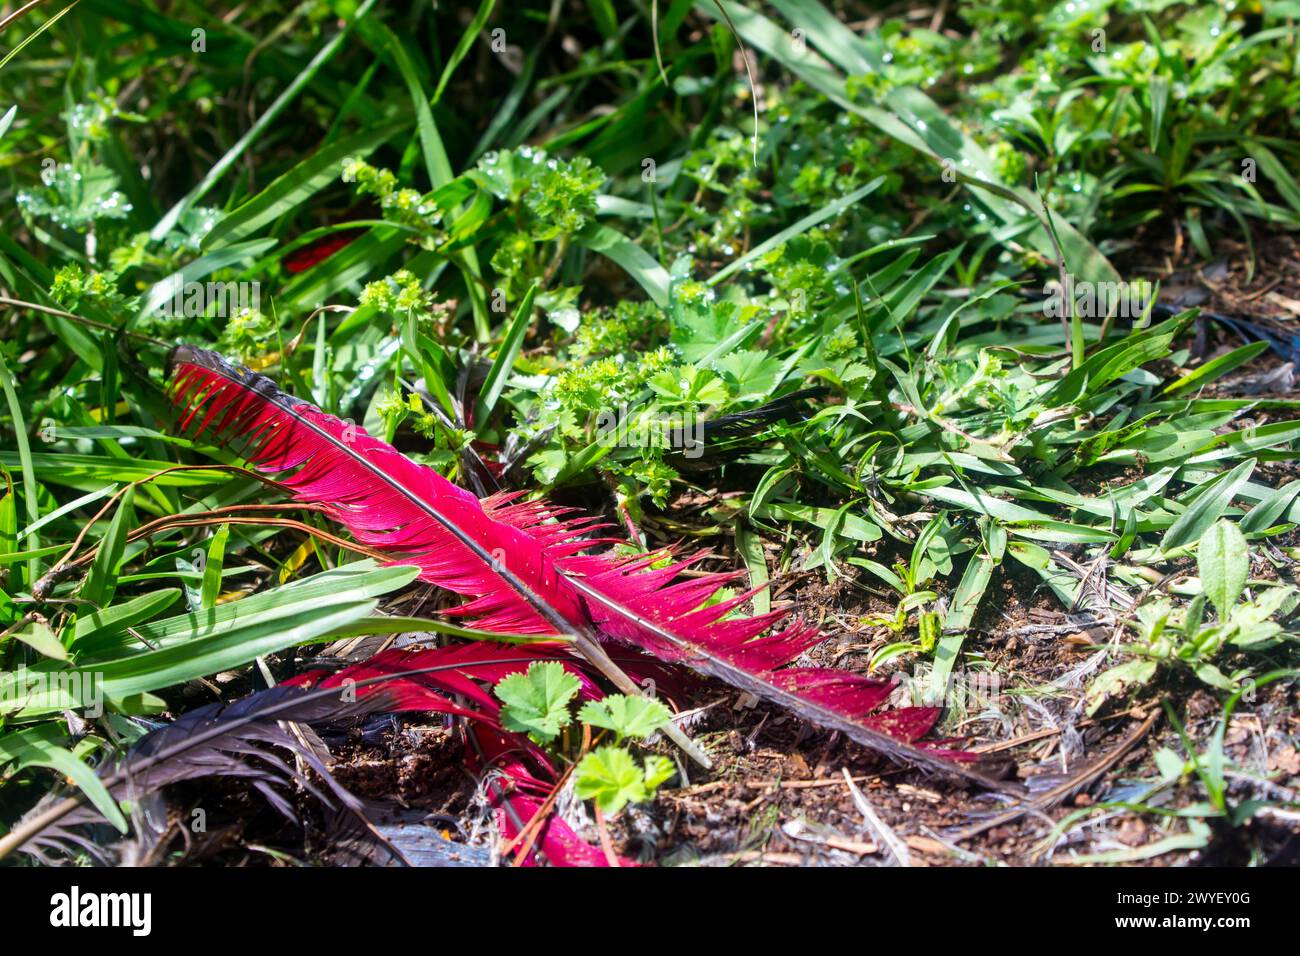 The red flight feathers of a lourie, also known as a Turaco, scattered among the bright green grass. Stock Photo